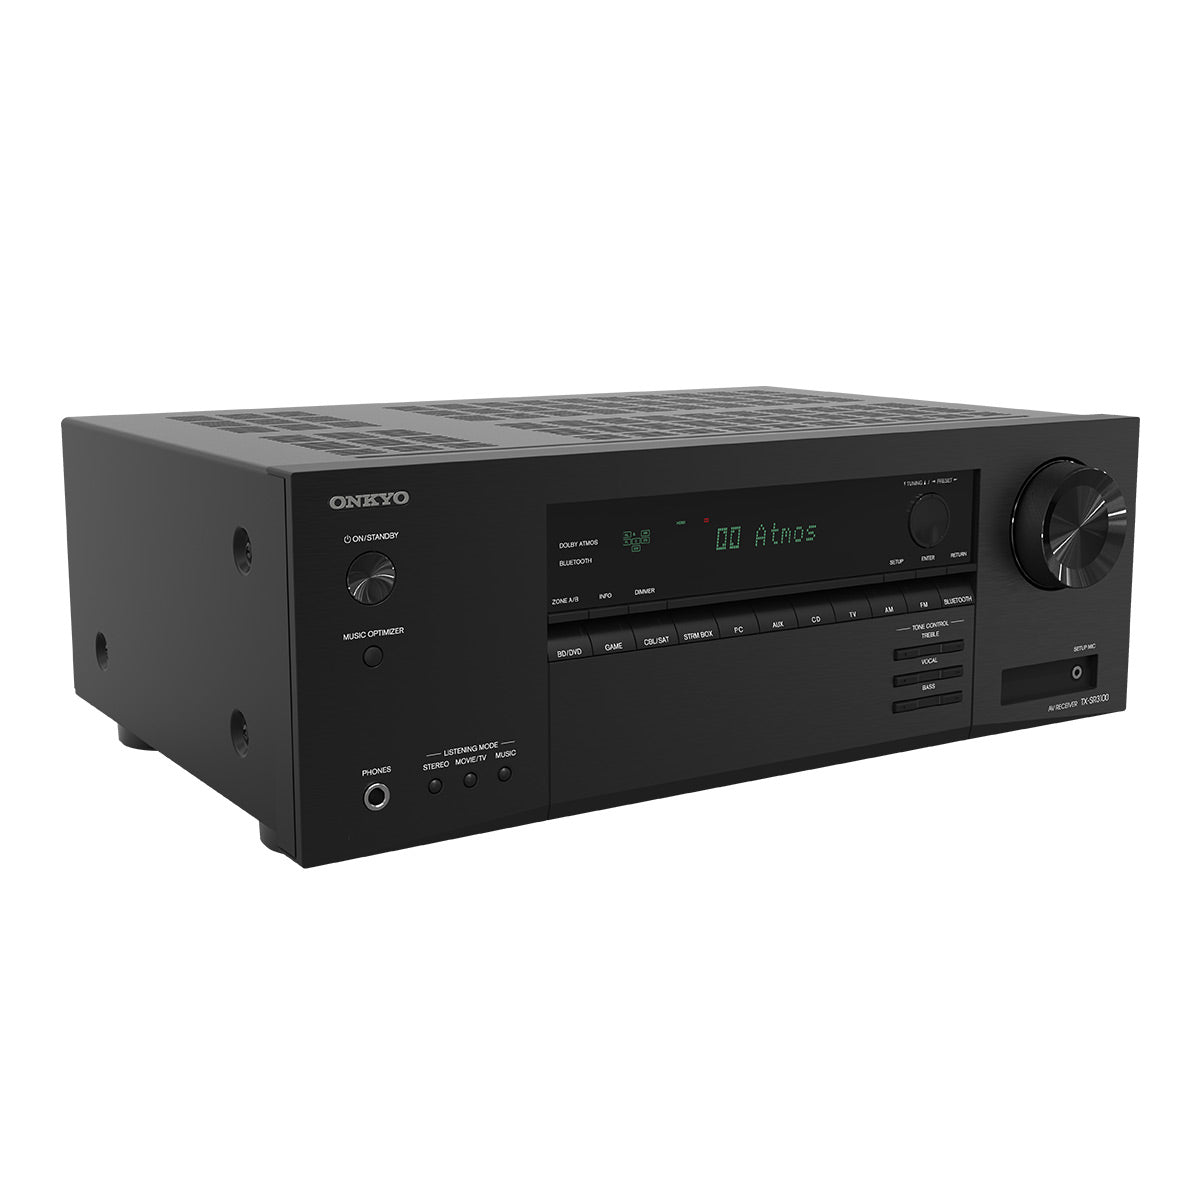 Onkyo TX-SR3100 Home Theater AV Receiver with Bluetooth, Dolby Atmos, and DTS-X (Black)